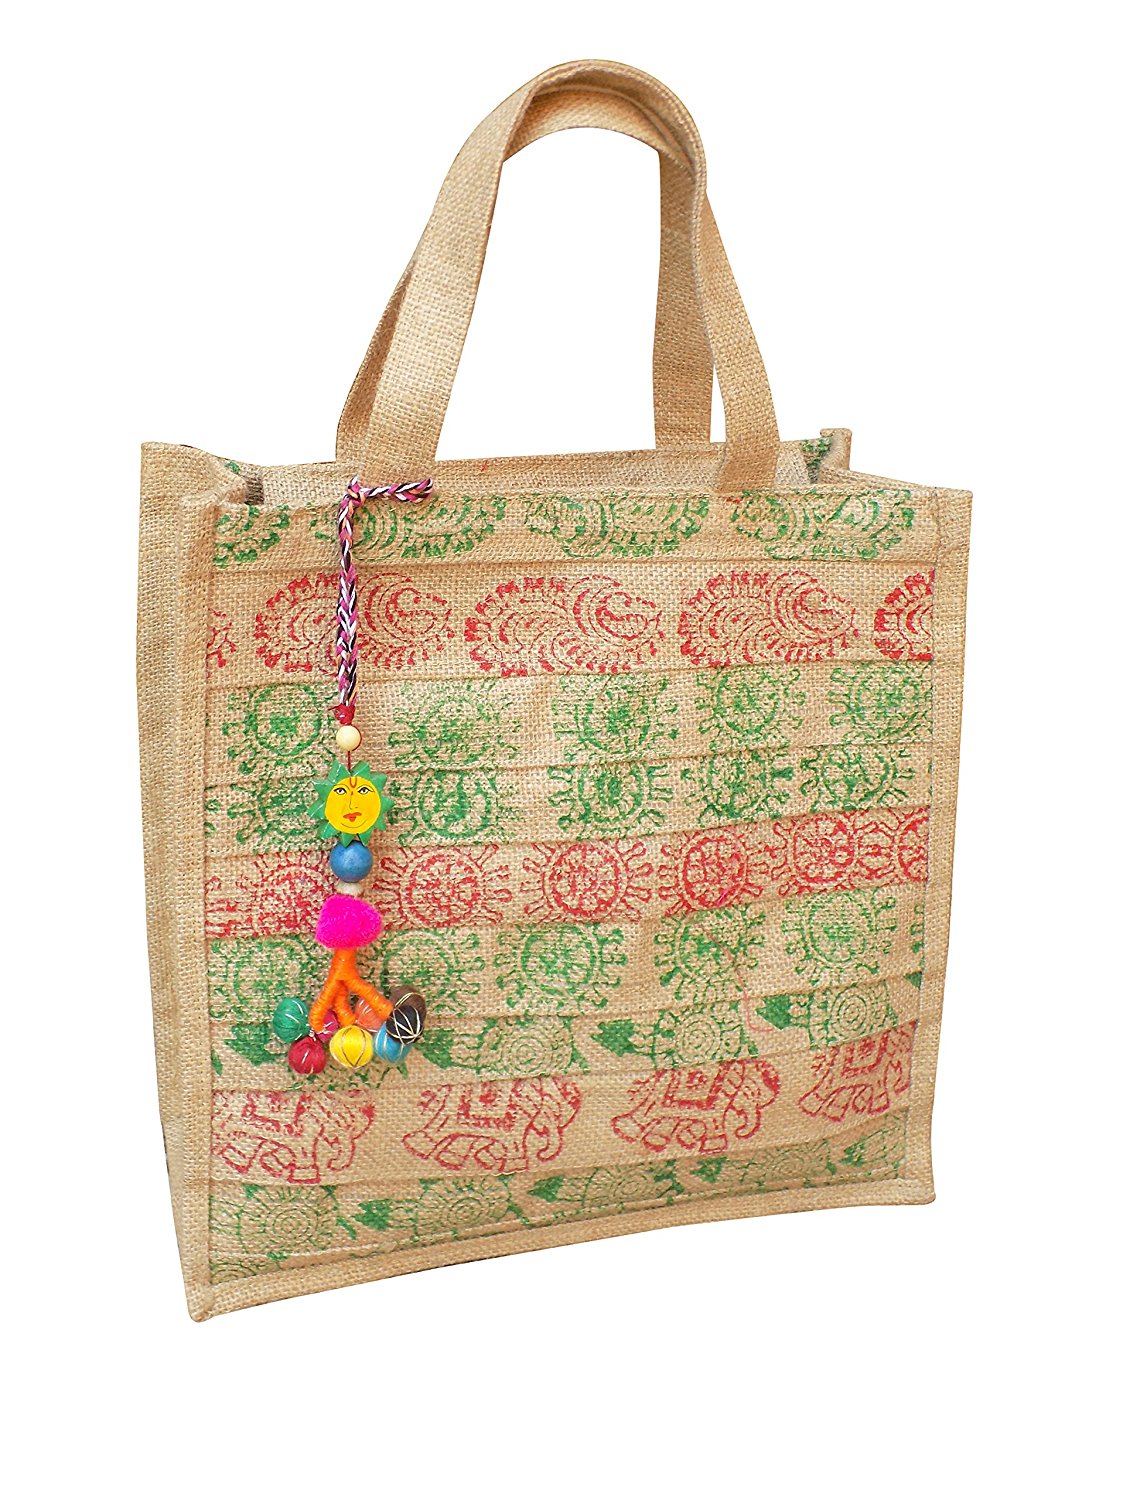 Buy Literacy India Indha 12.0 inch Hand Block Print Jute Tiffin/Lunch ...